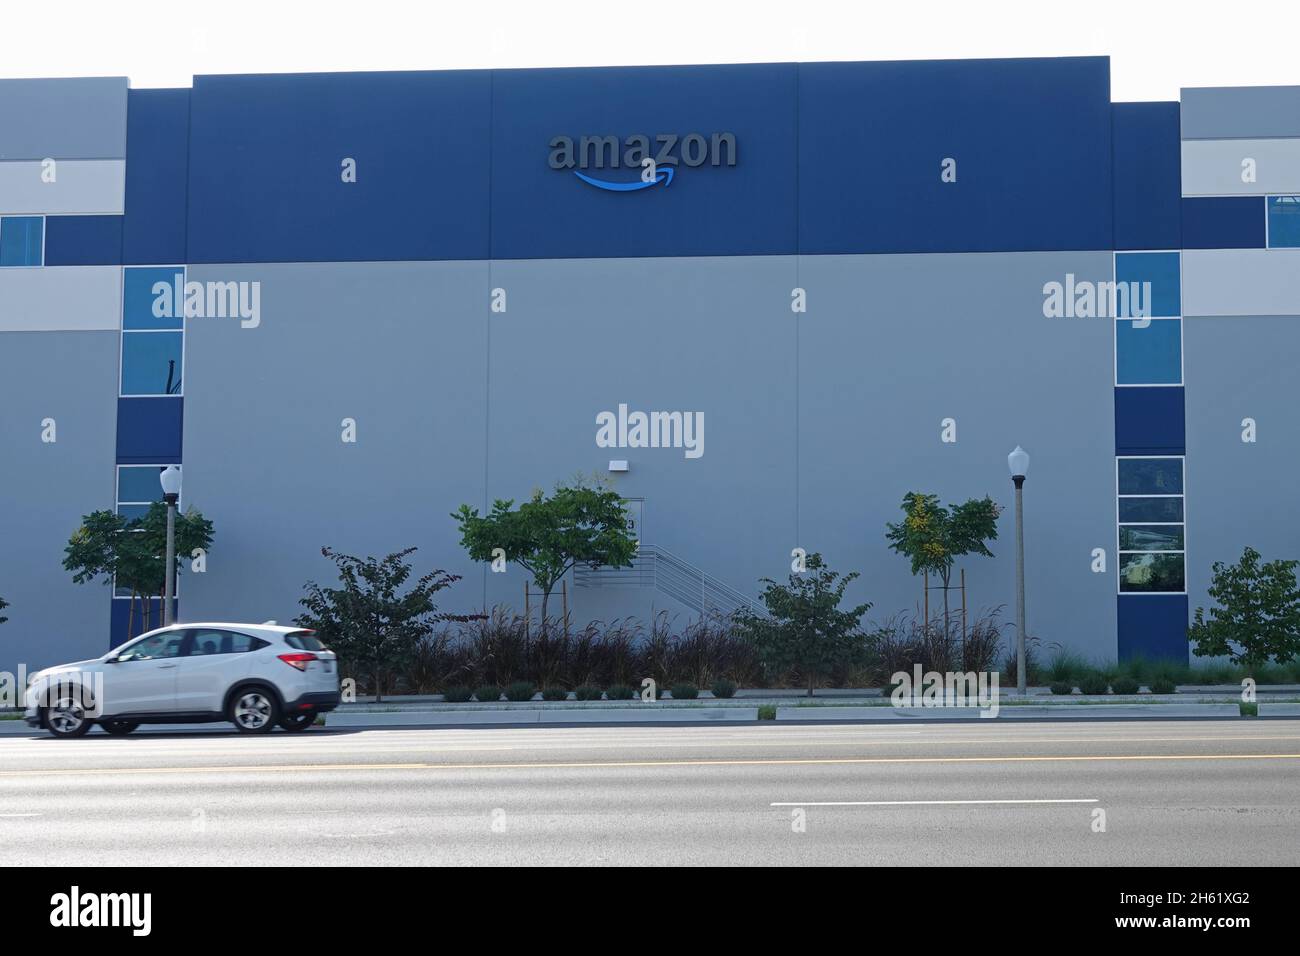 Burbank, CA / USA - Sept. 26, 2021: A newly-opened Amazon delivery center facility is shown adjacent to the Hollywood Burbank Airport during the day. Stock Photo